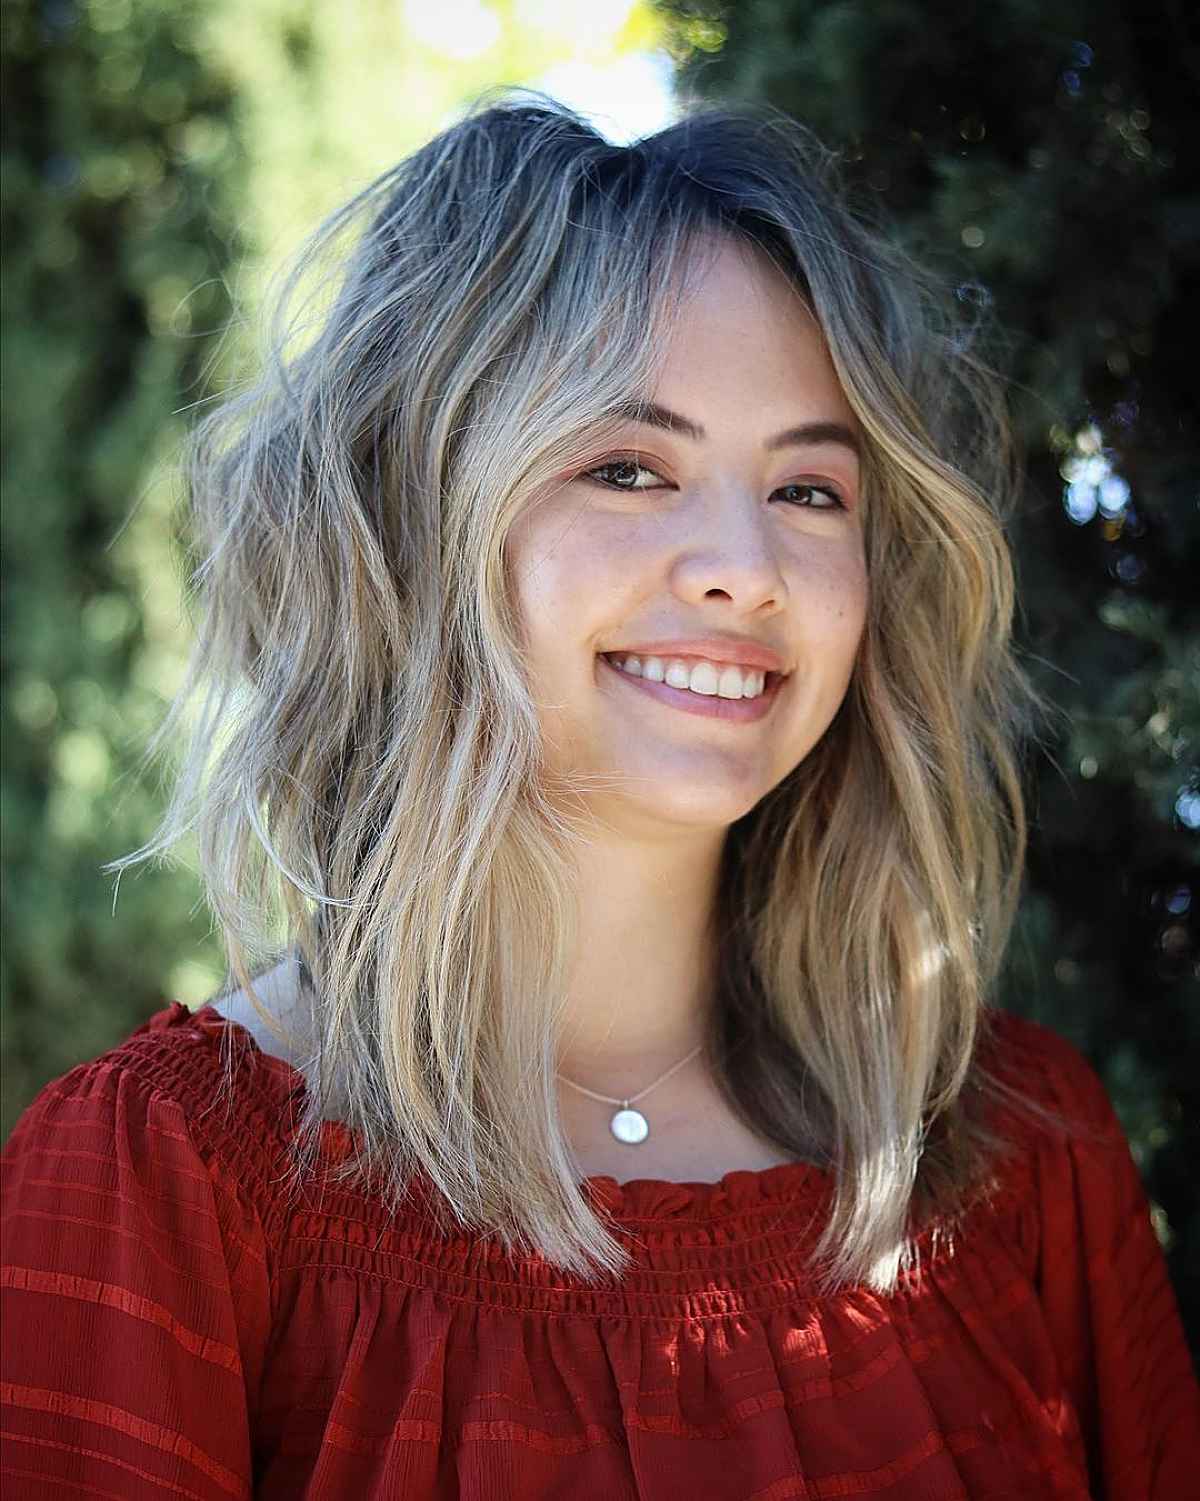 A medium length shaggy haircut with no bangs or face framing is a cool idea to make your hair look full